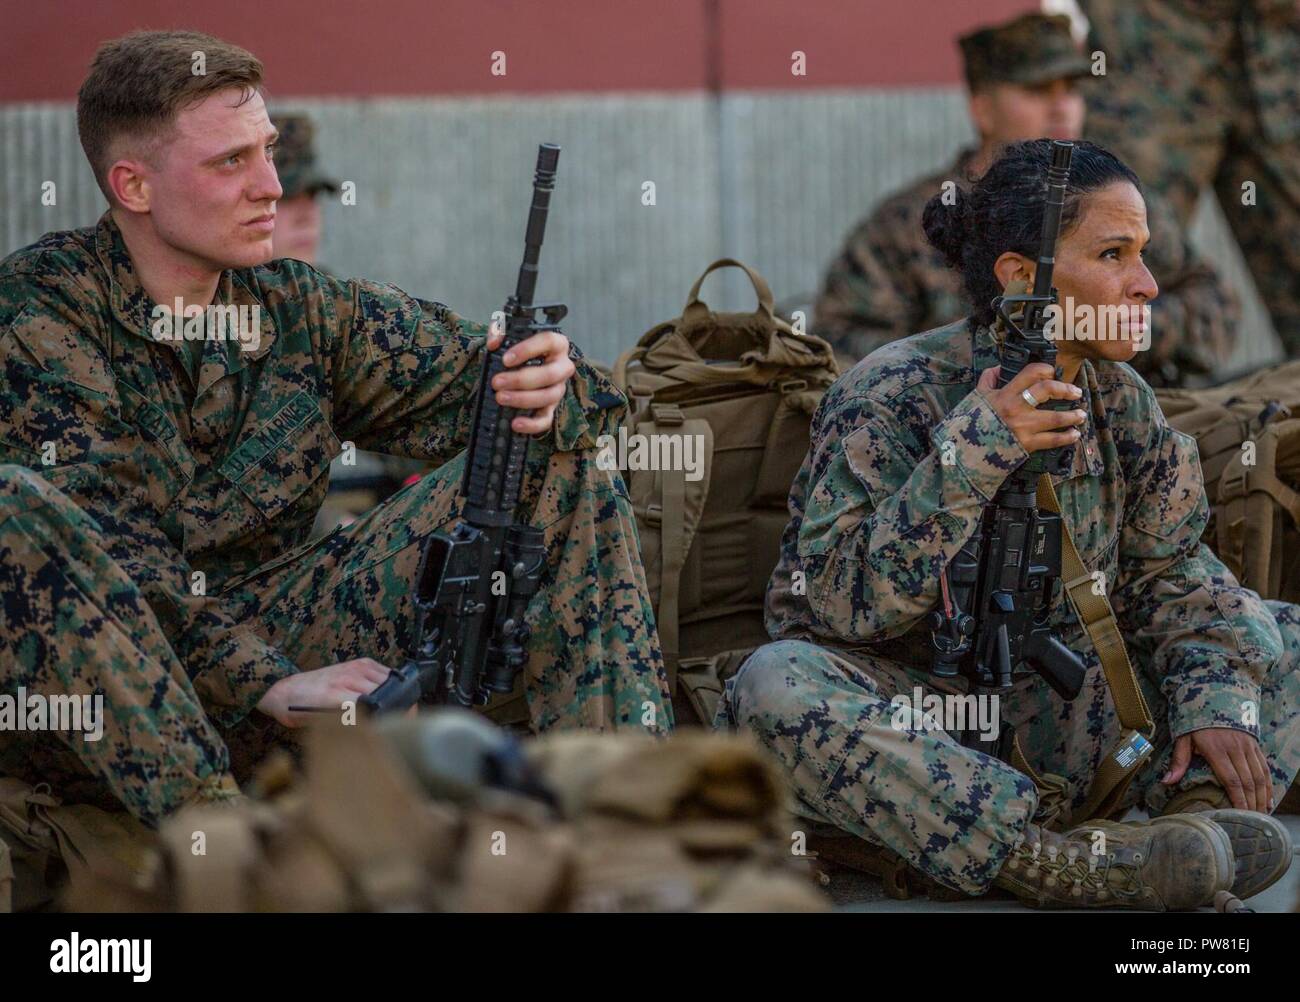 Camp Pendleton (September 29, 2017) Staff Sgt. Daniel J. Reatz (left) a cyber security technician and Chief Warrant Officer Three Serena M. Trice (right) an intelligence master analyst with the 11th Marine Expeditionary Unit (MEU), listen as the commanding officer of the MEU congratulates the Marines for successfully completing a conditioning hike on Camp Pendleton, California. The purpose of the conditioning hike is to target key areas, which are involved with propelling the body forward while also improving cardiovascular fitness, endurance, flexibility, strength and most importantly unit co Stock Photo